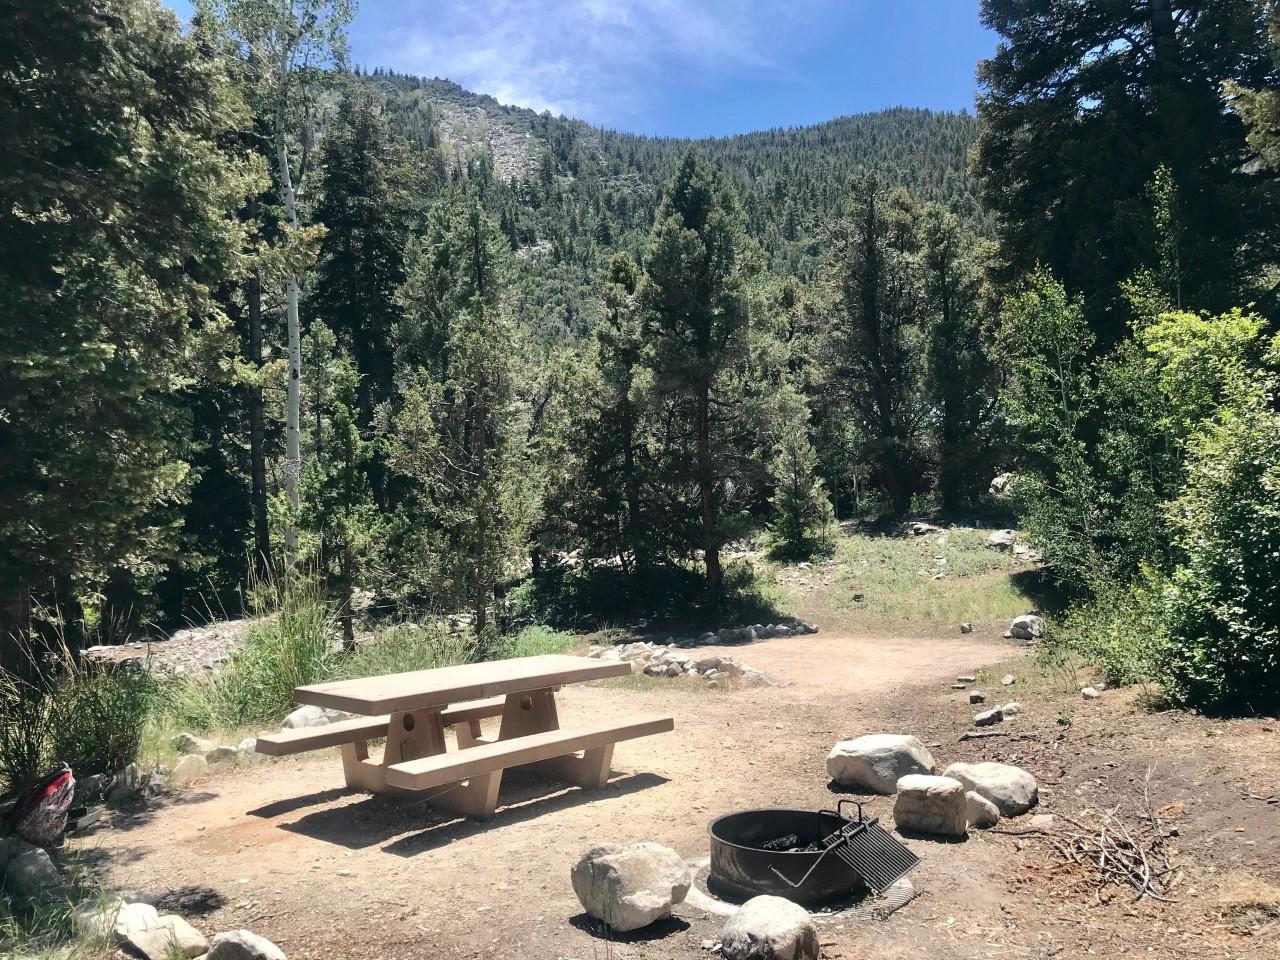 Picnic table, grill, empty tent pad. Surrounded by pine trees with a view of mountain tops.